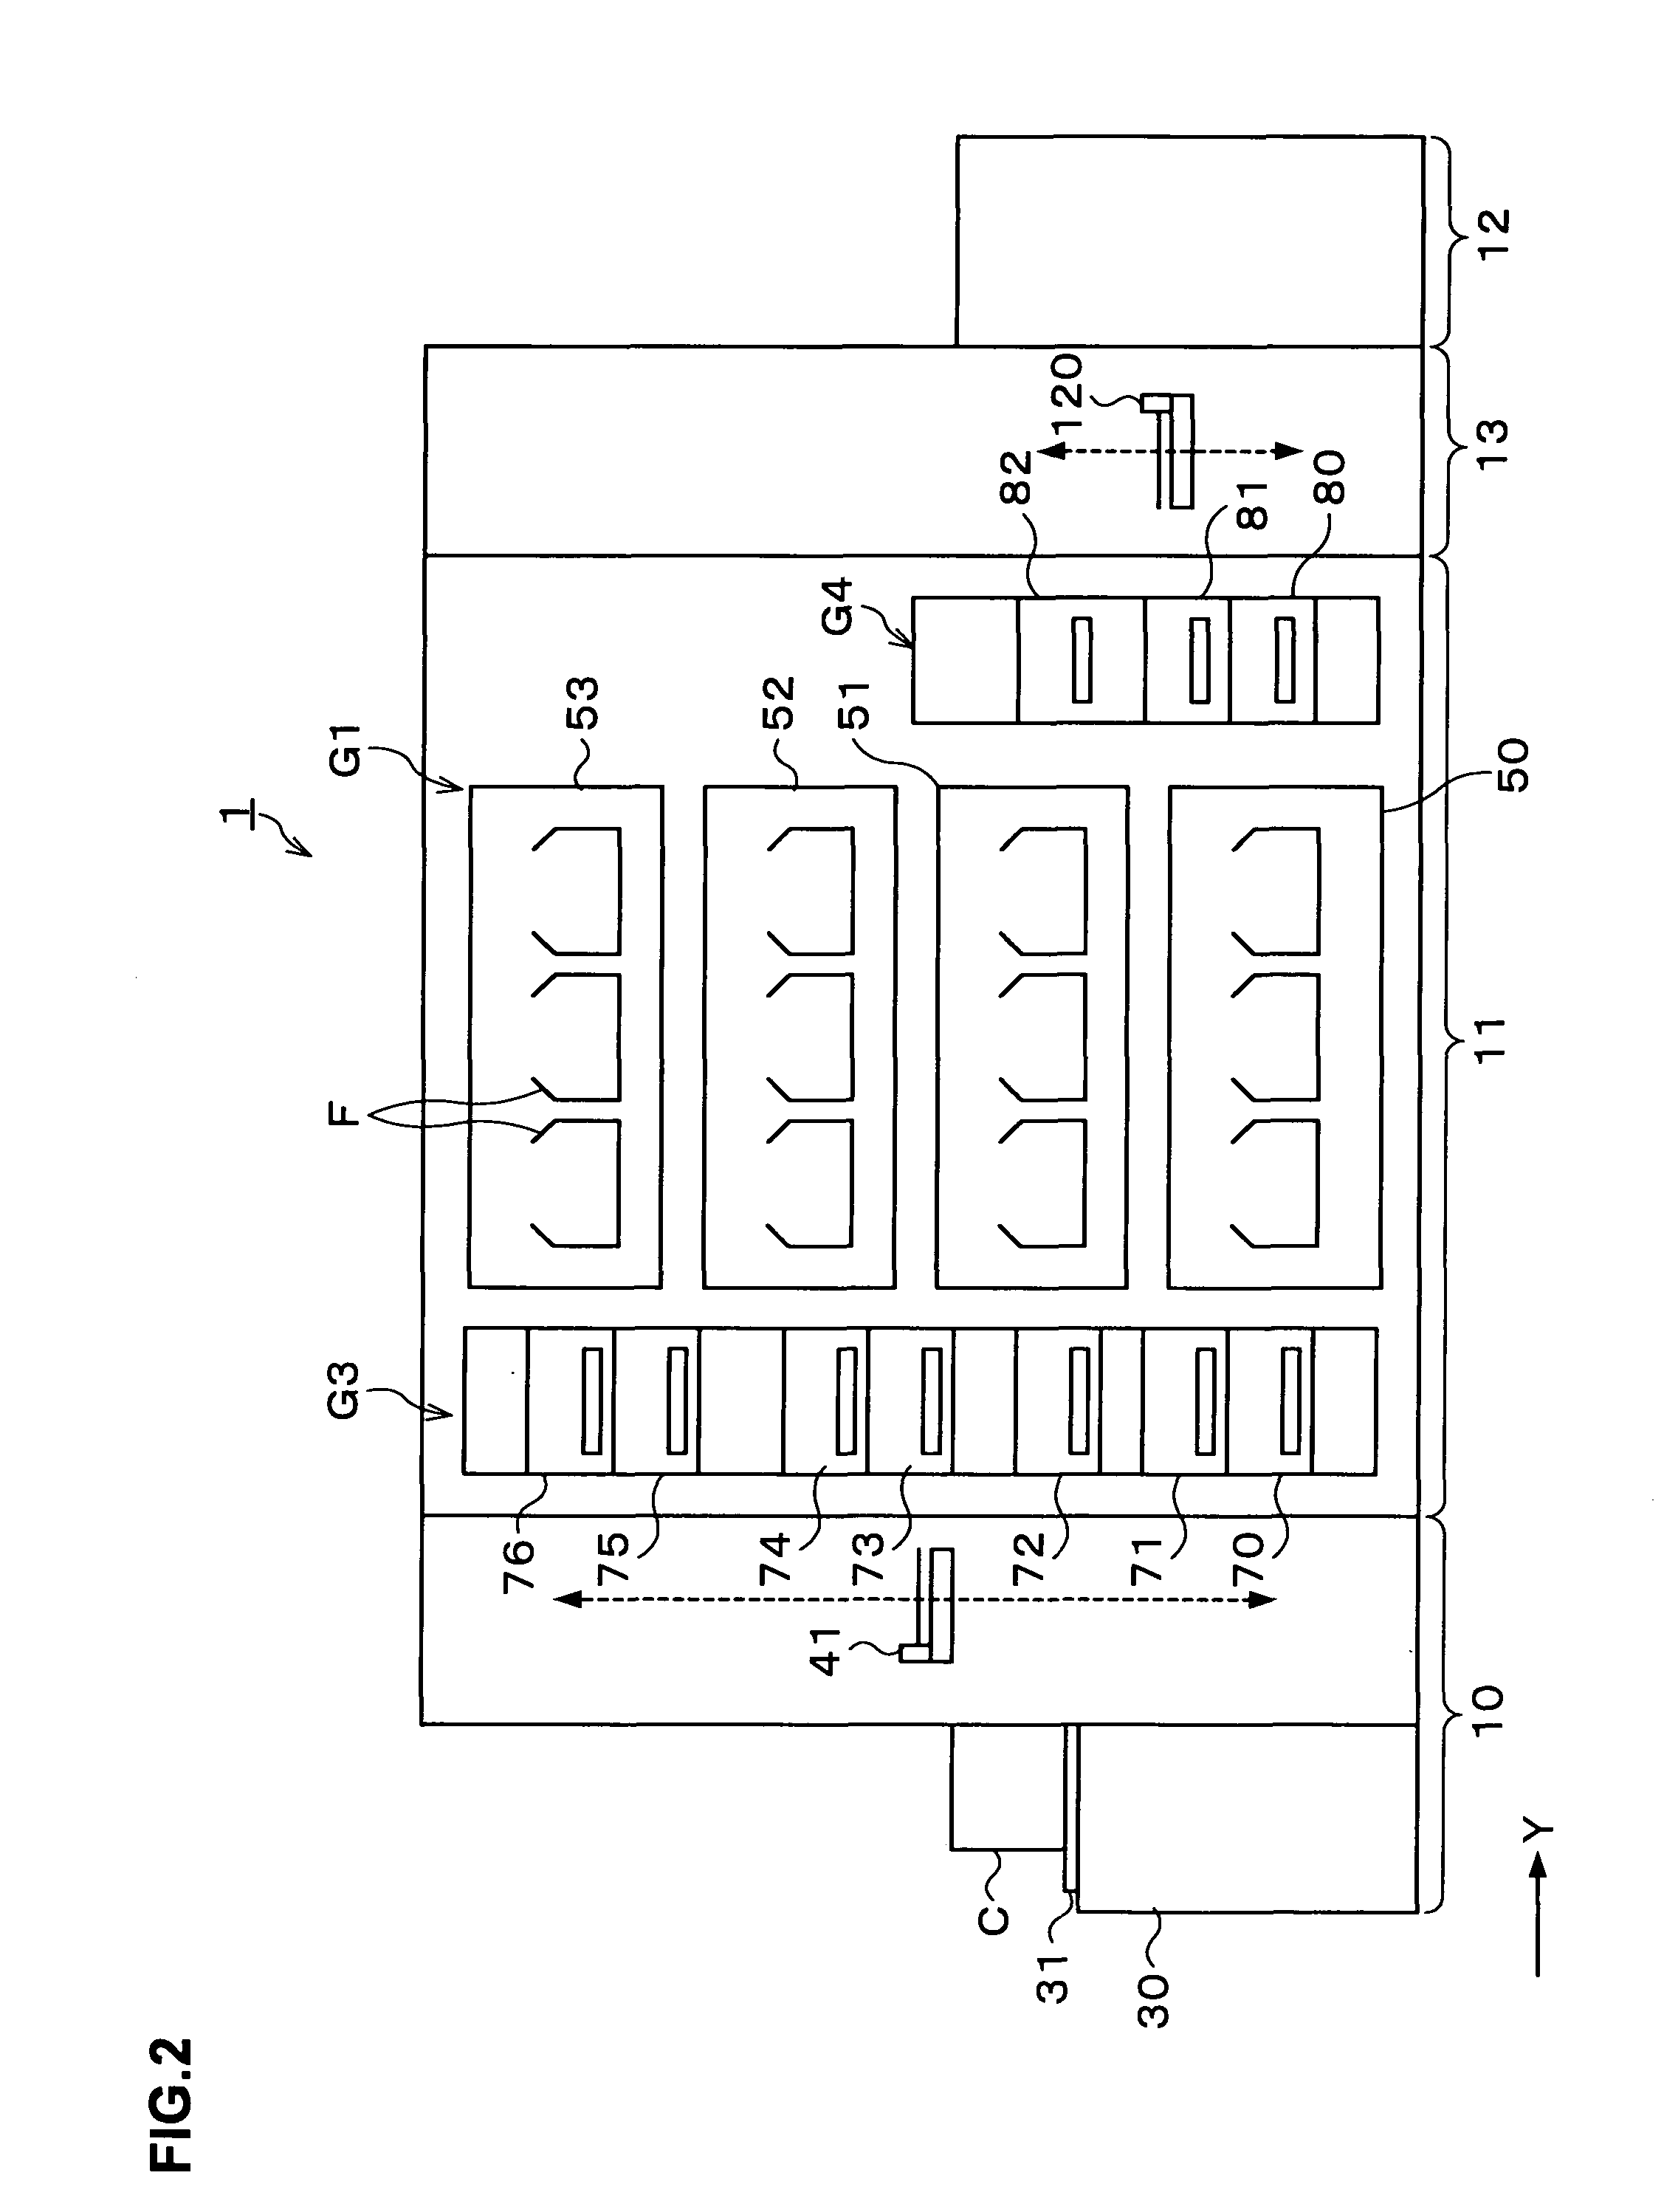 Substrate transfer apparatus and substrate treatment system